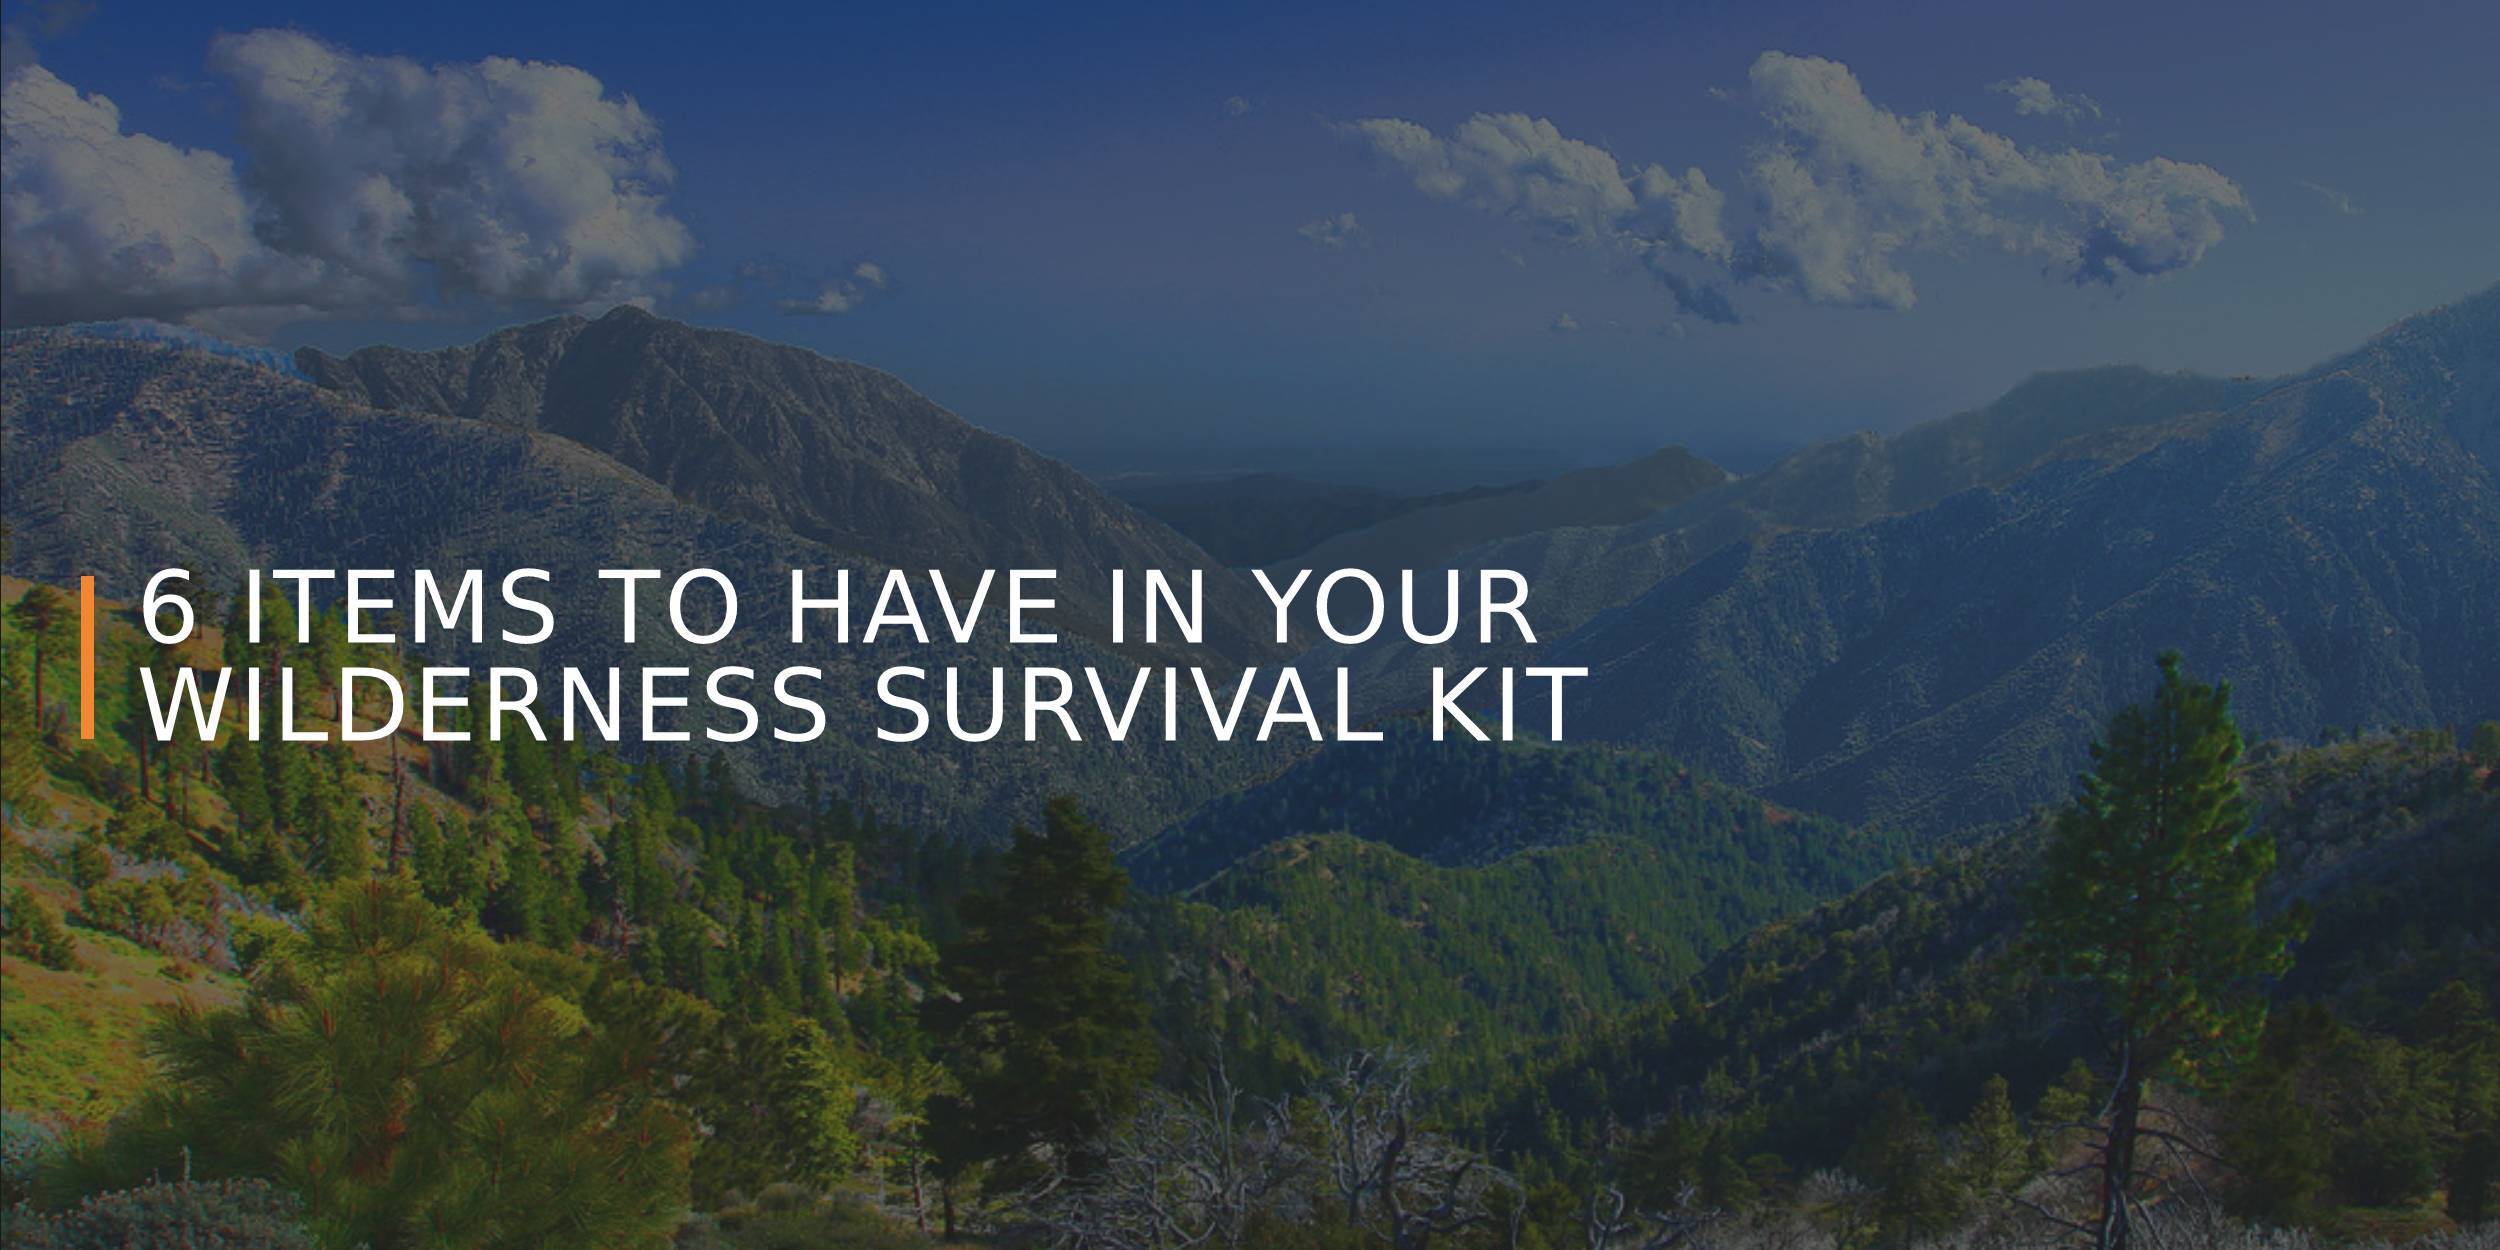 6 Essentials to Have in Your Wilderness Survival Kit